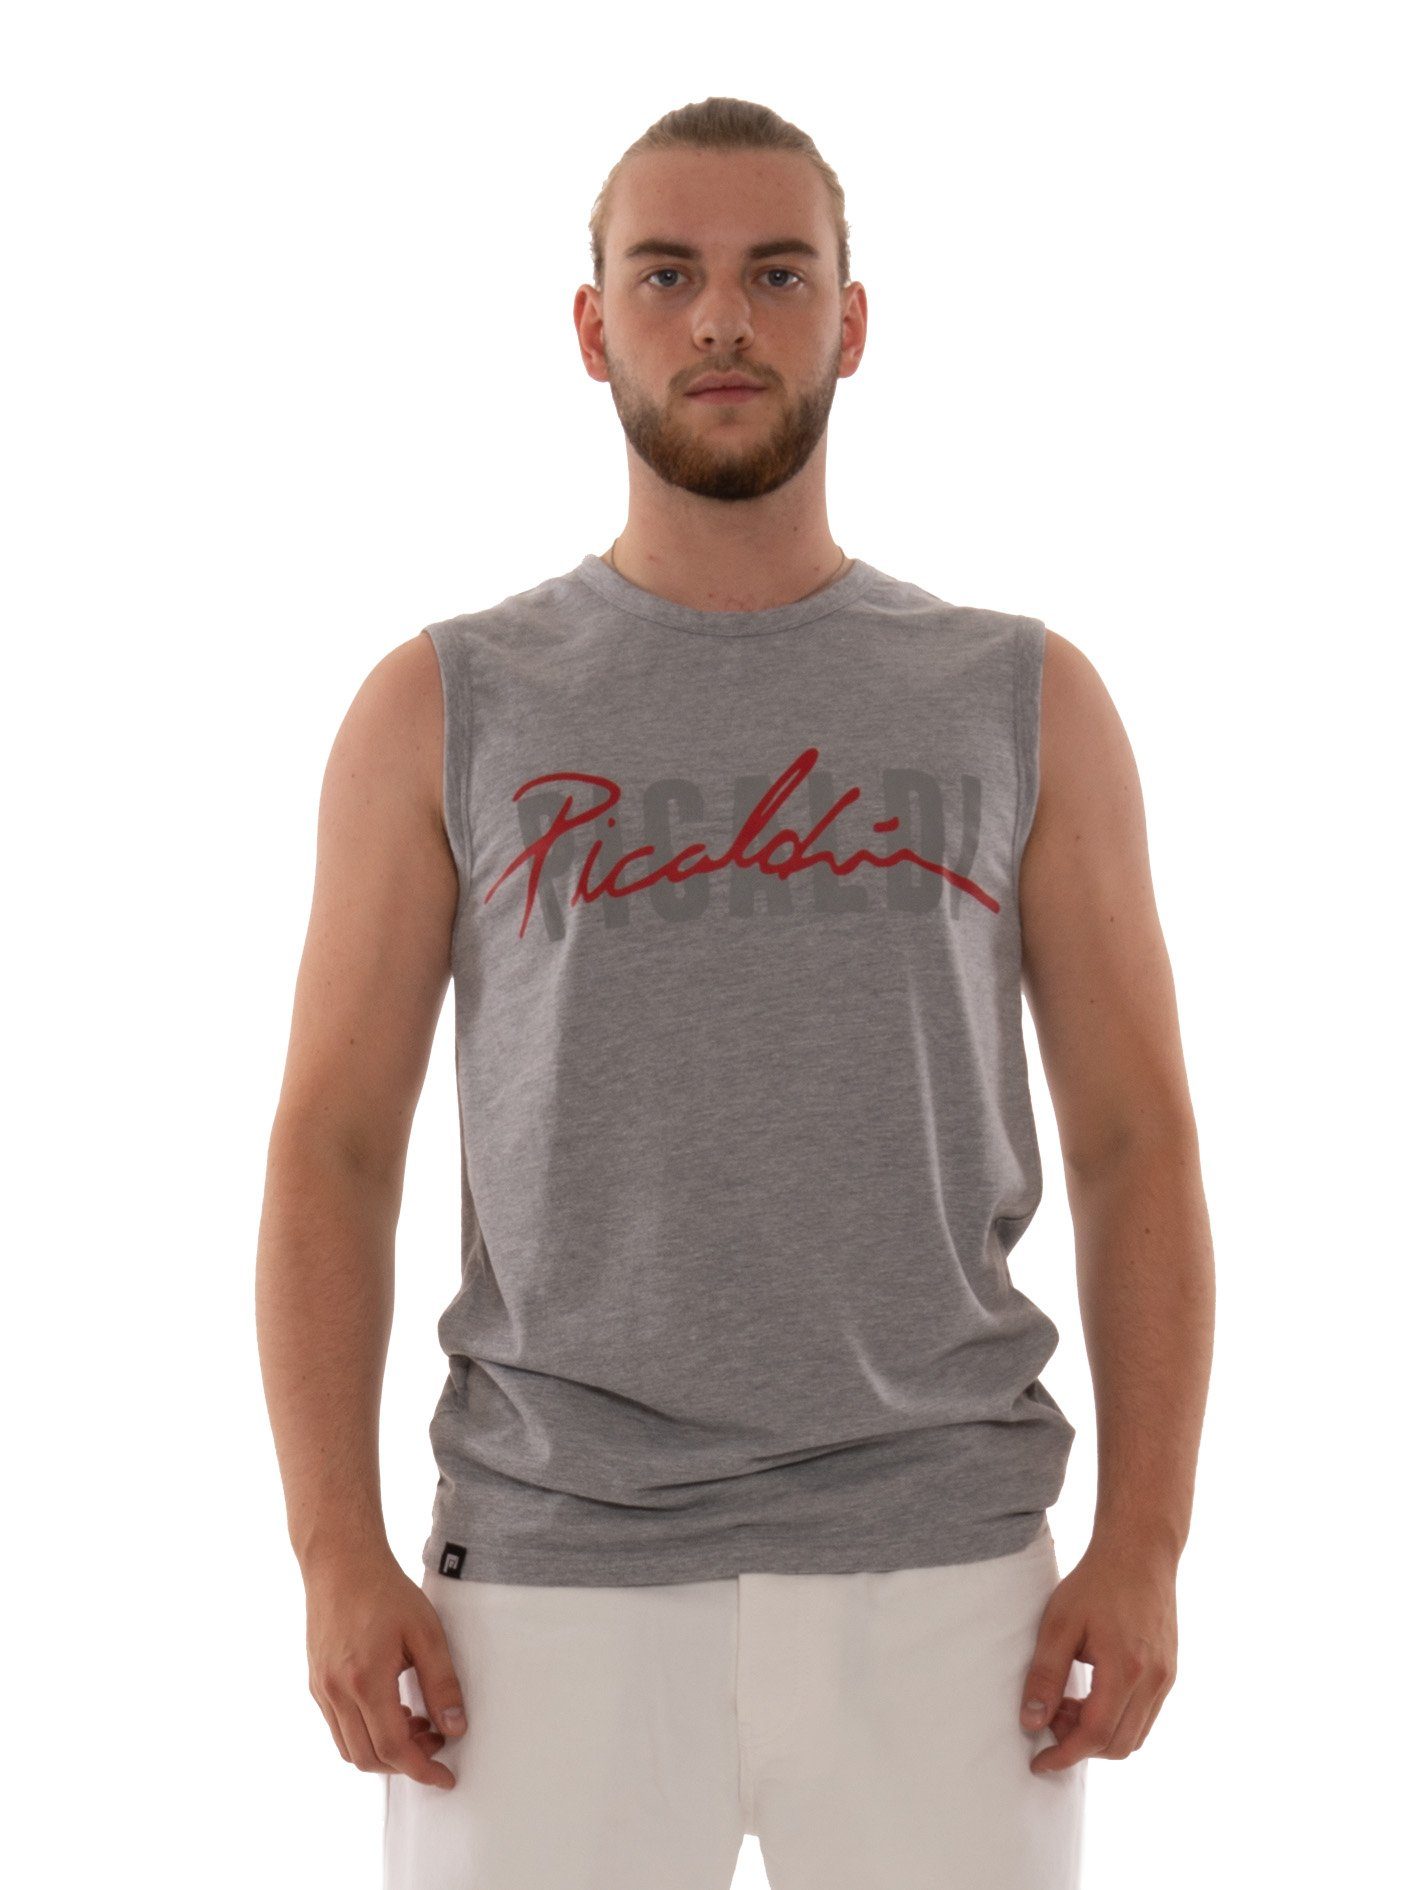 PICALDI Jeans Muskelshirt Collection Print, Rundhalsausschnit Grey